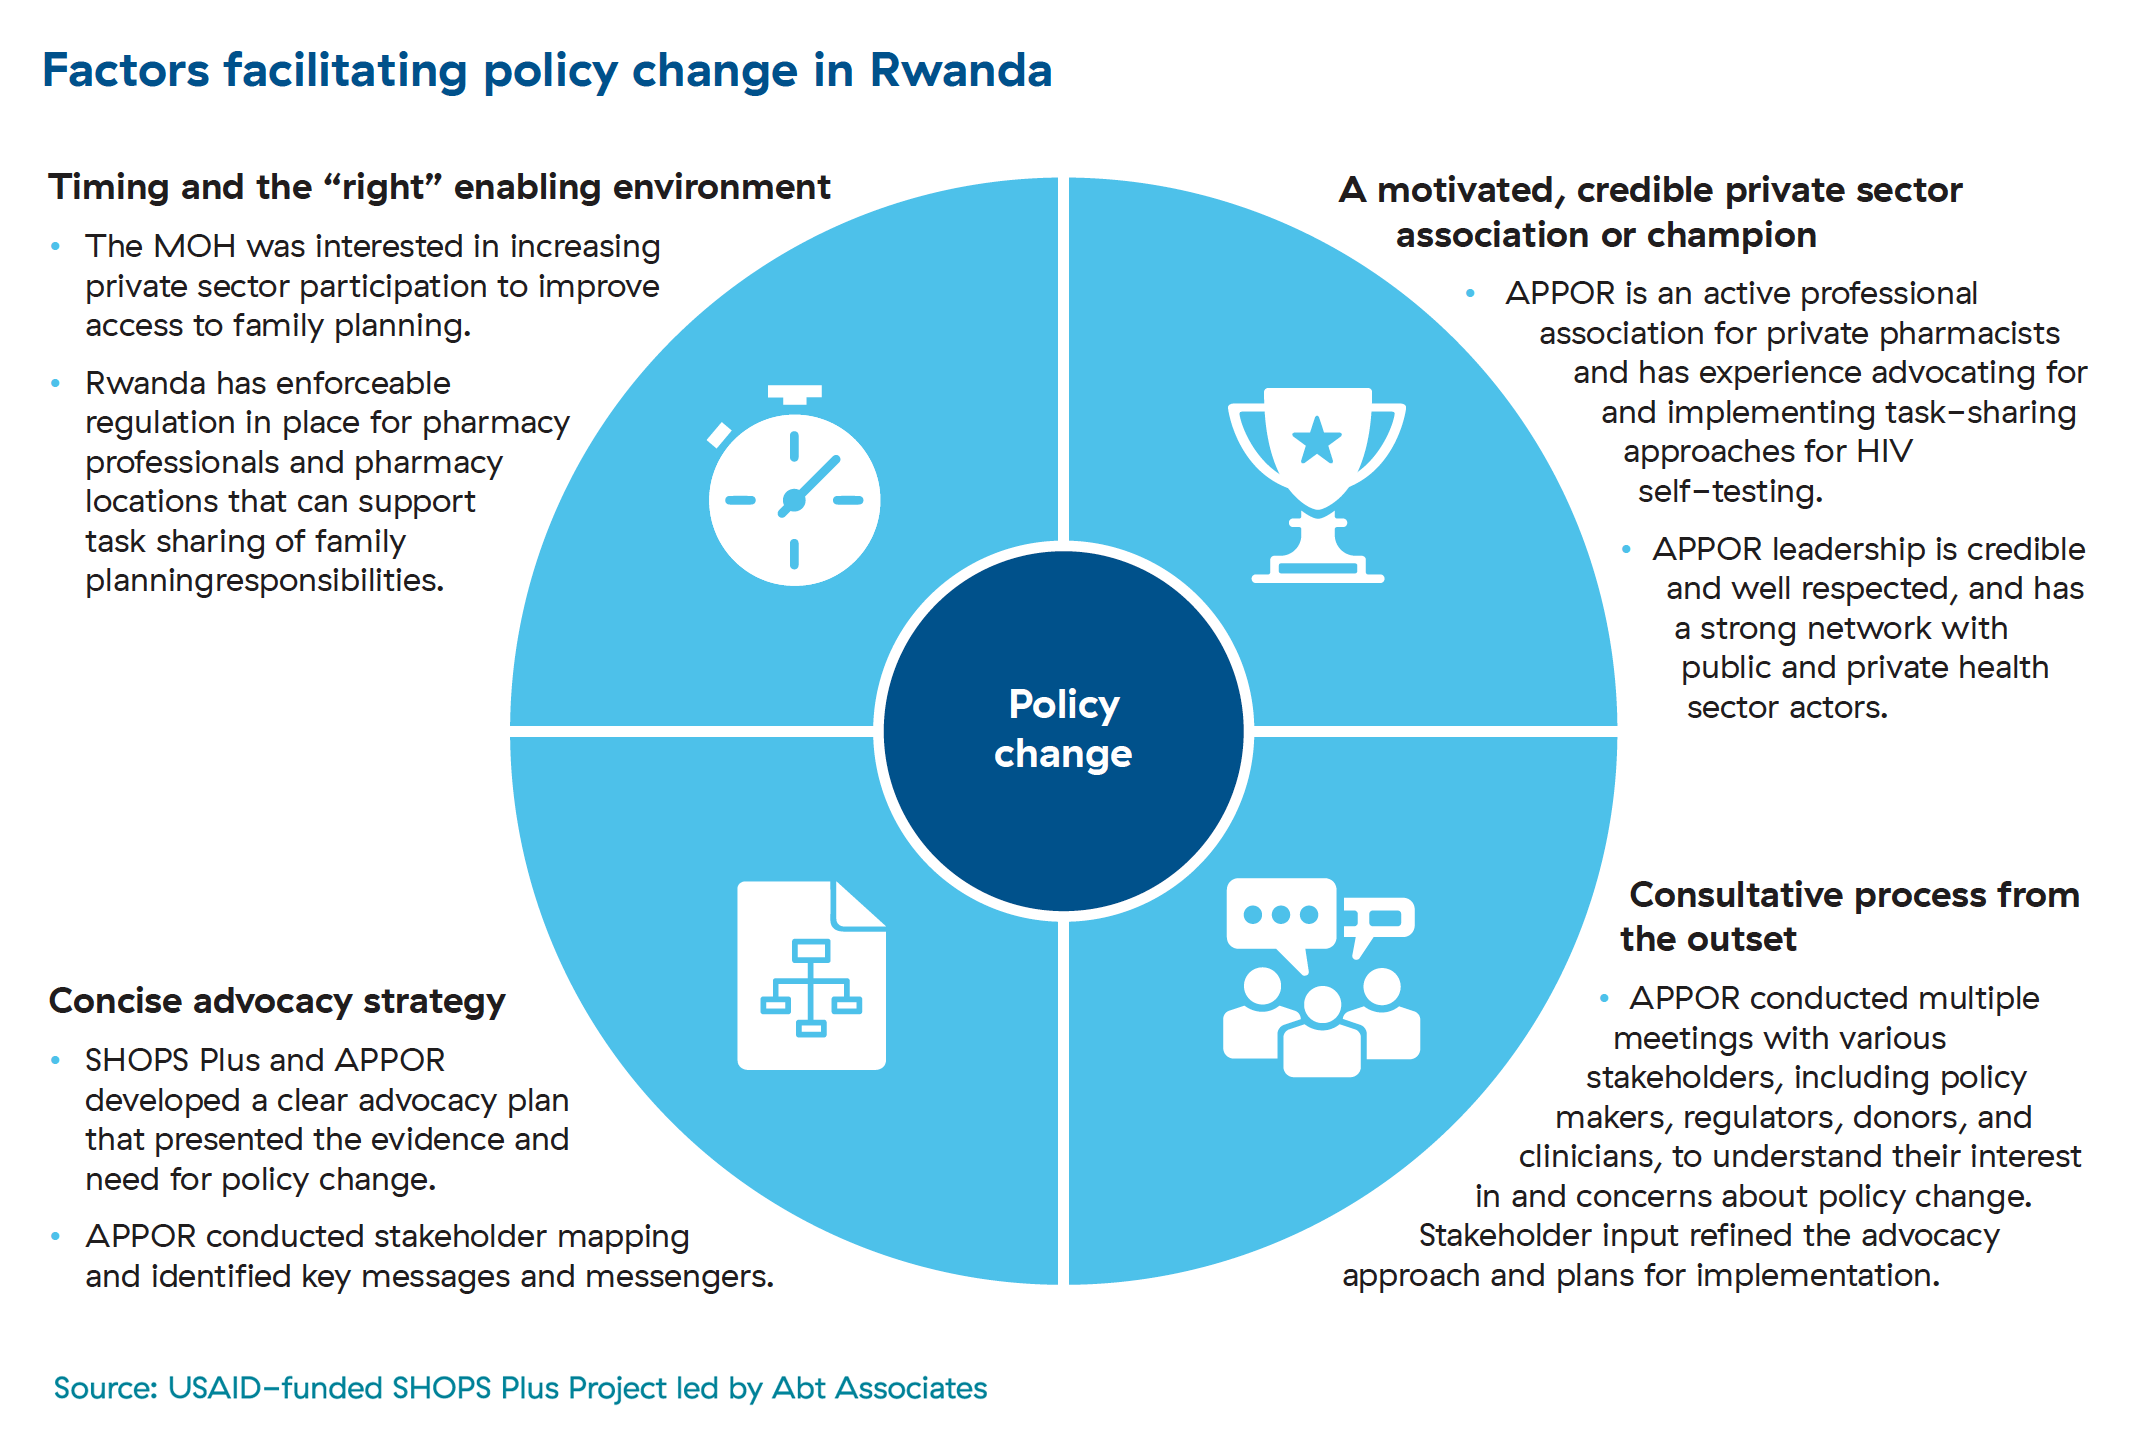 Figure showing the four main factors that helped facilitate the policy change in Rwanda.